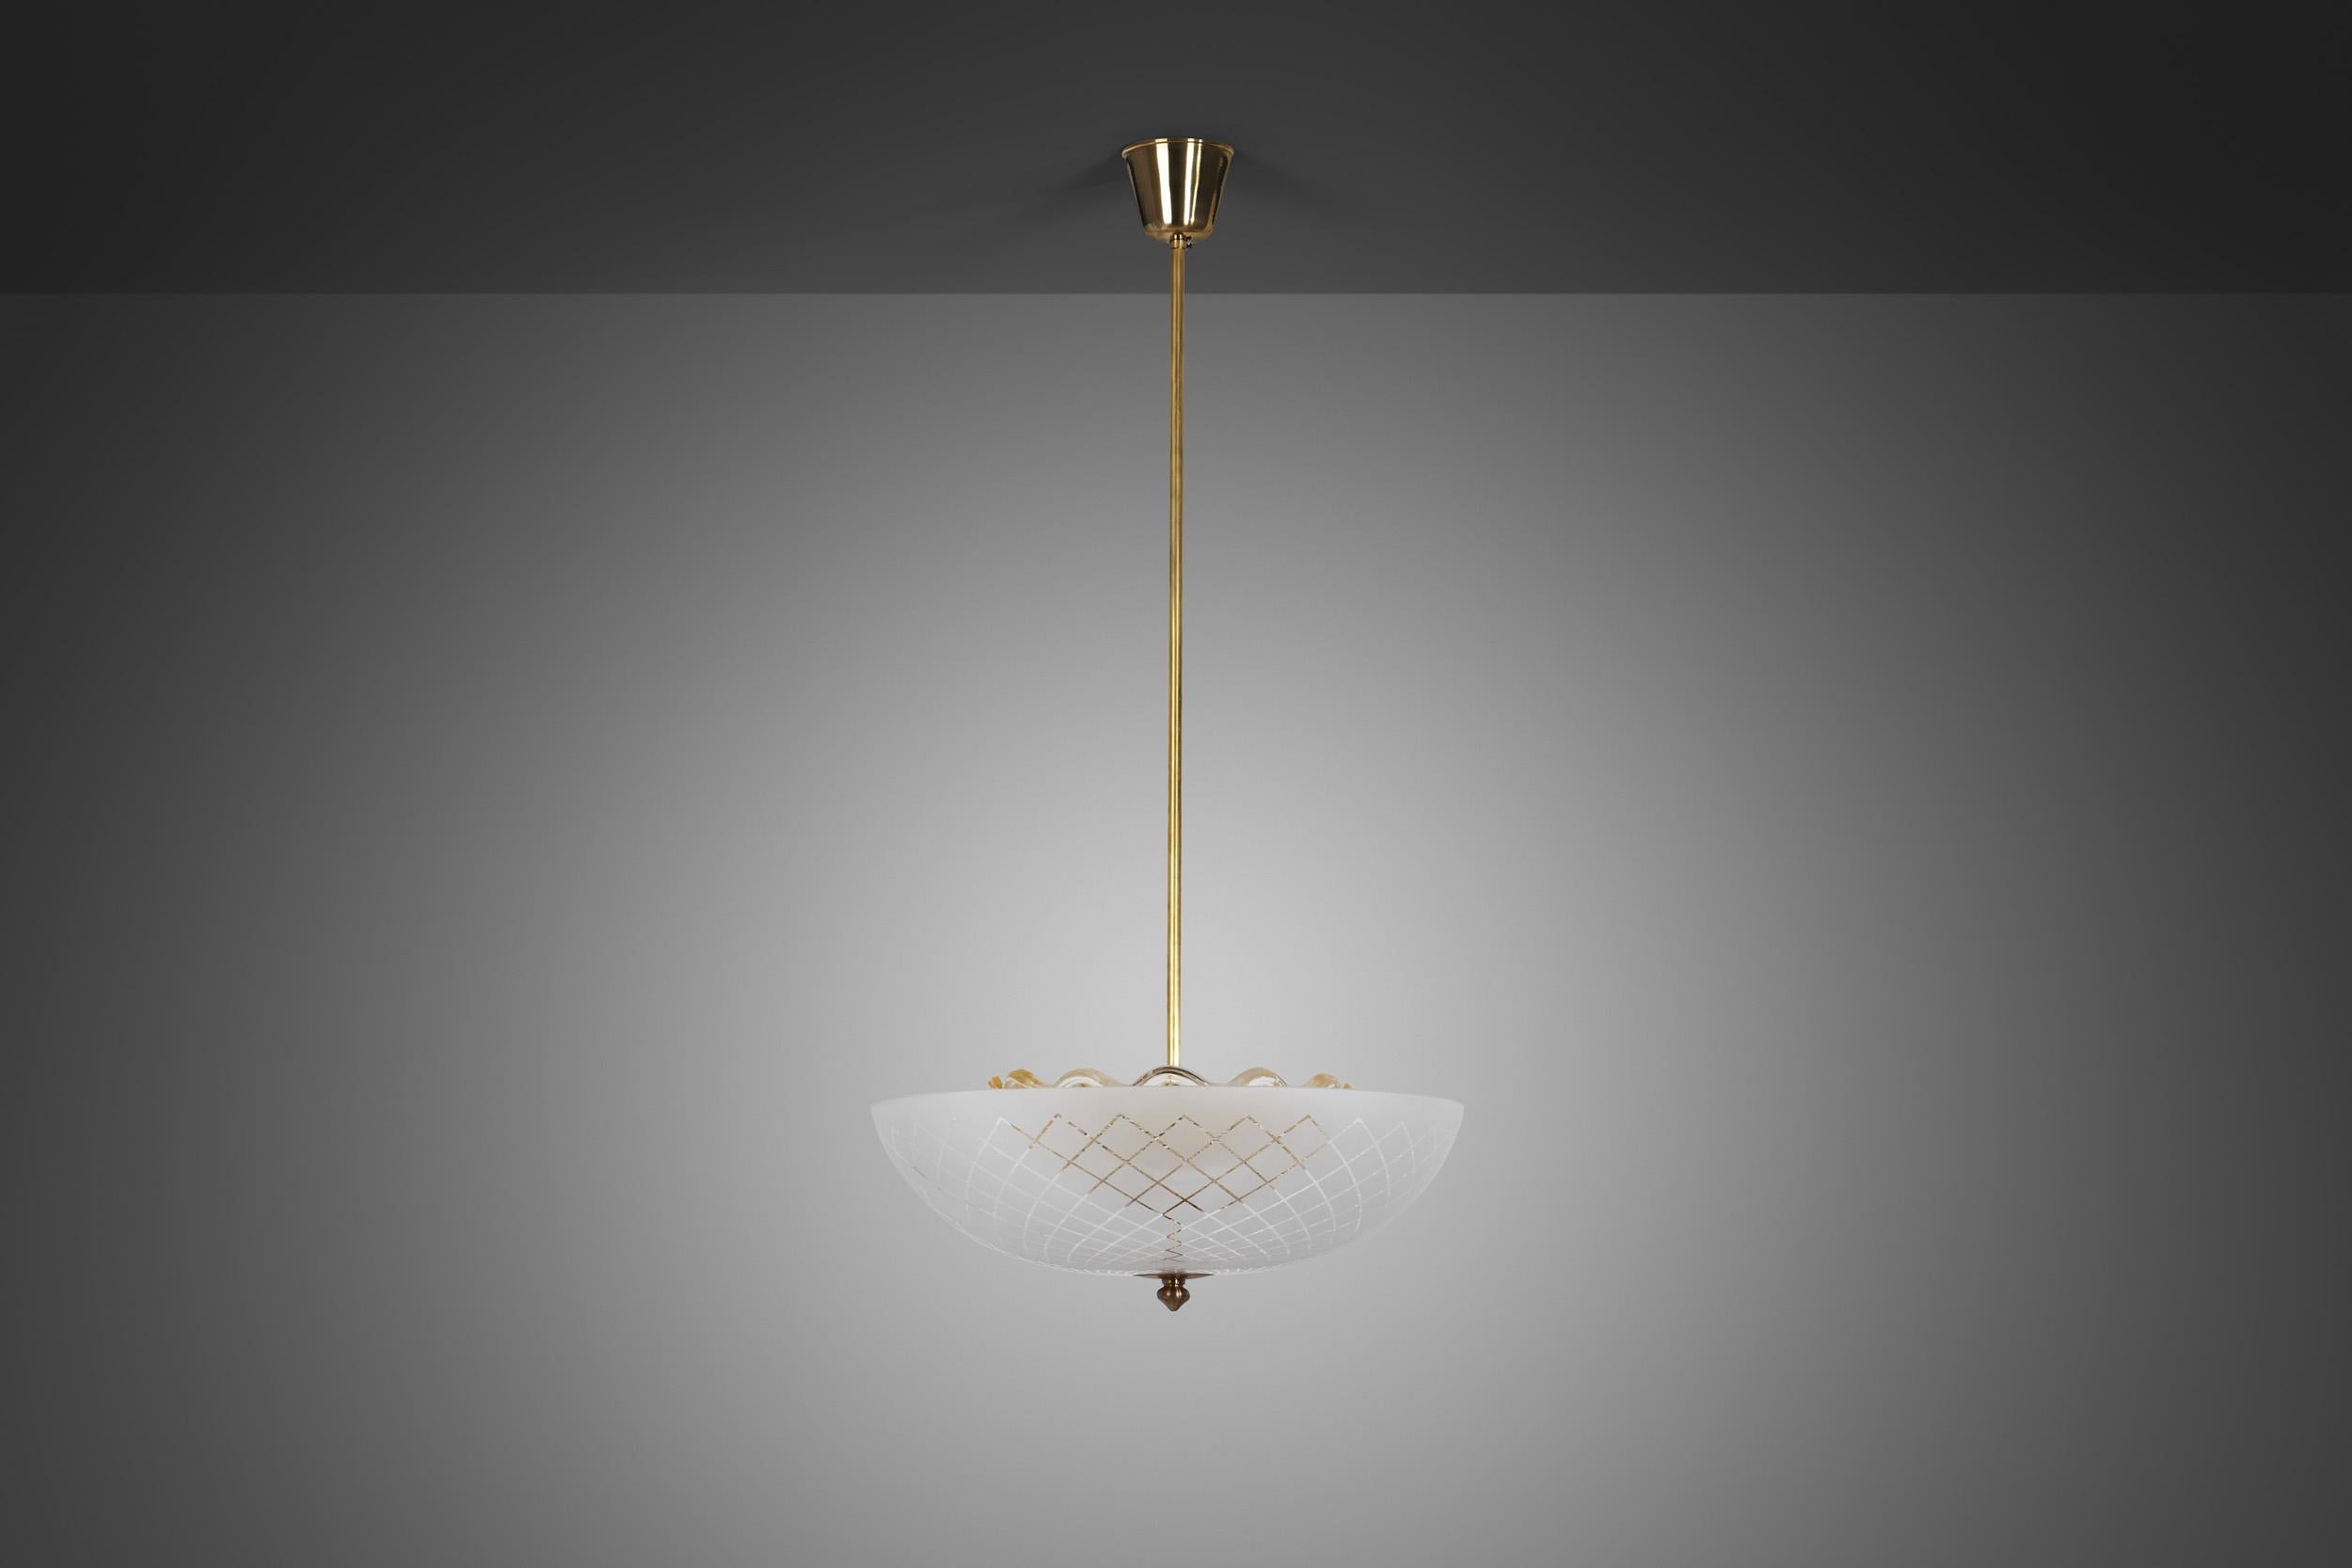 Mid-20th Century Swedish Modern Glass Ceiling Lamp by Orrefors, Sweden 1930s For Sale